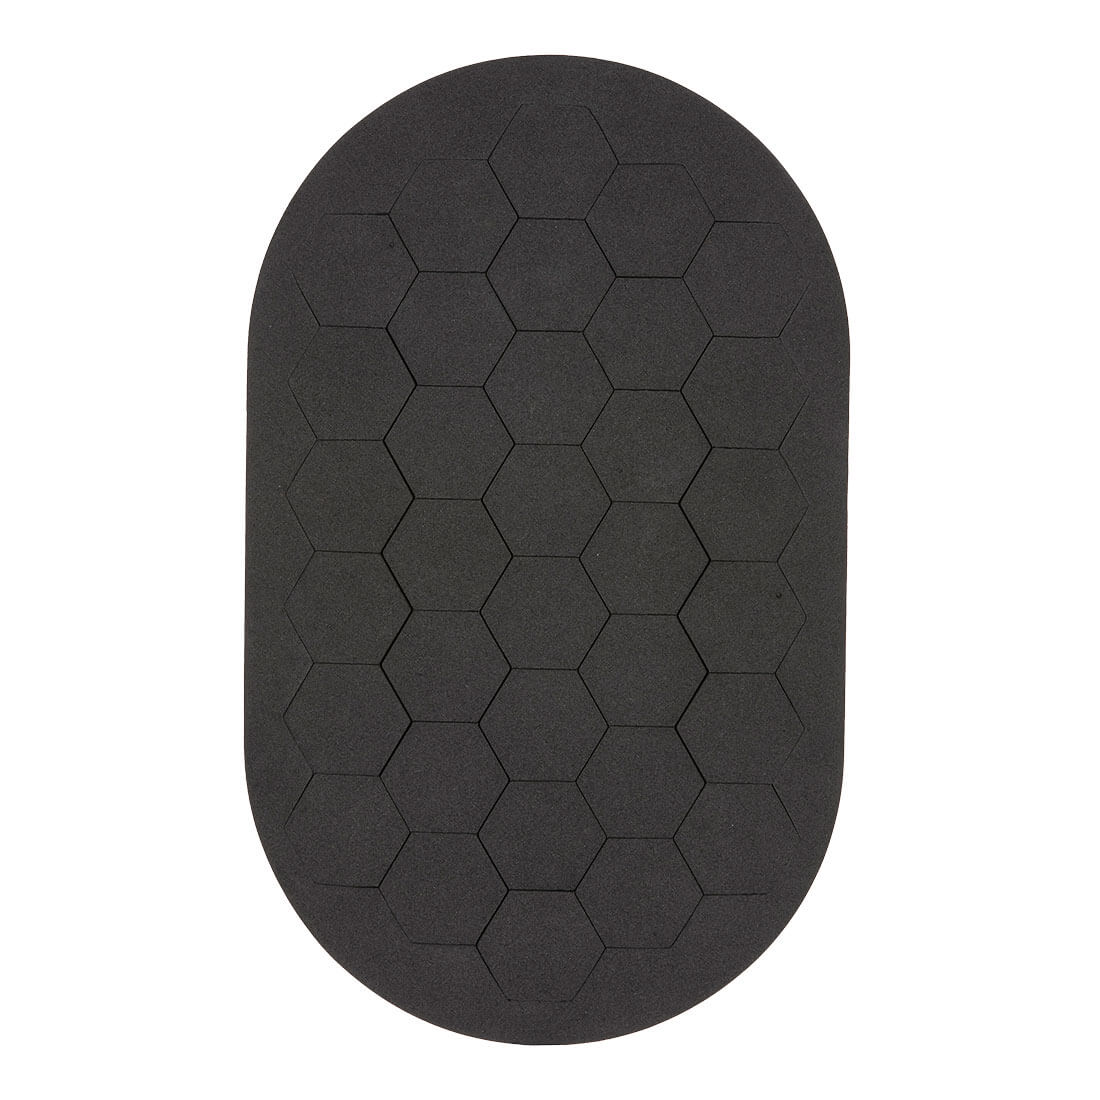 Flexible 3 Layer Knee Pad Inserts  (KP33)